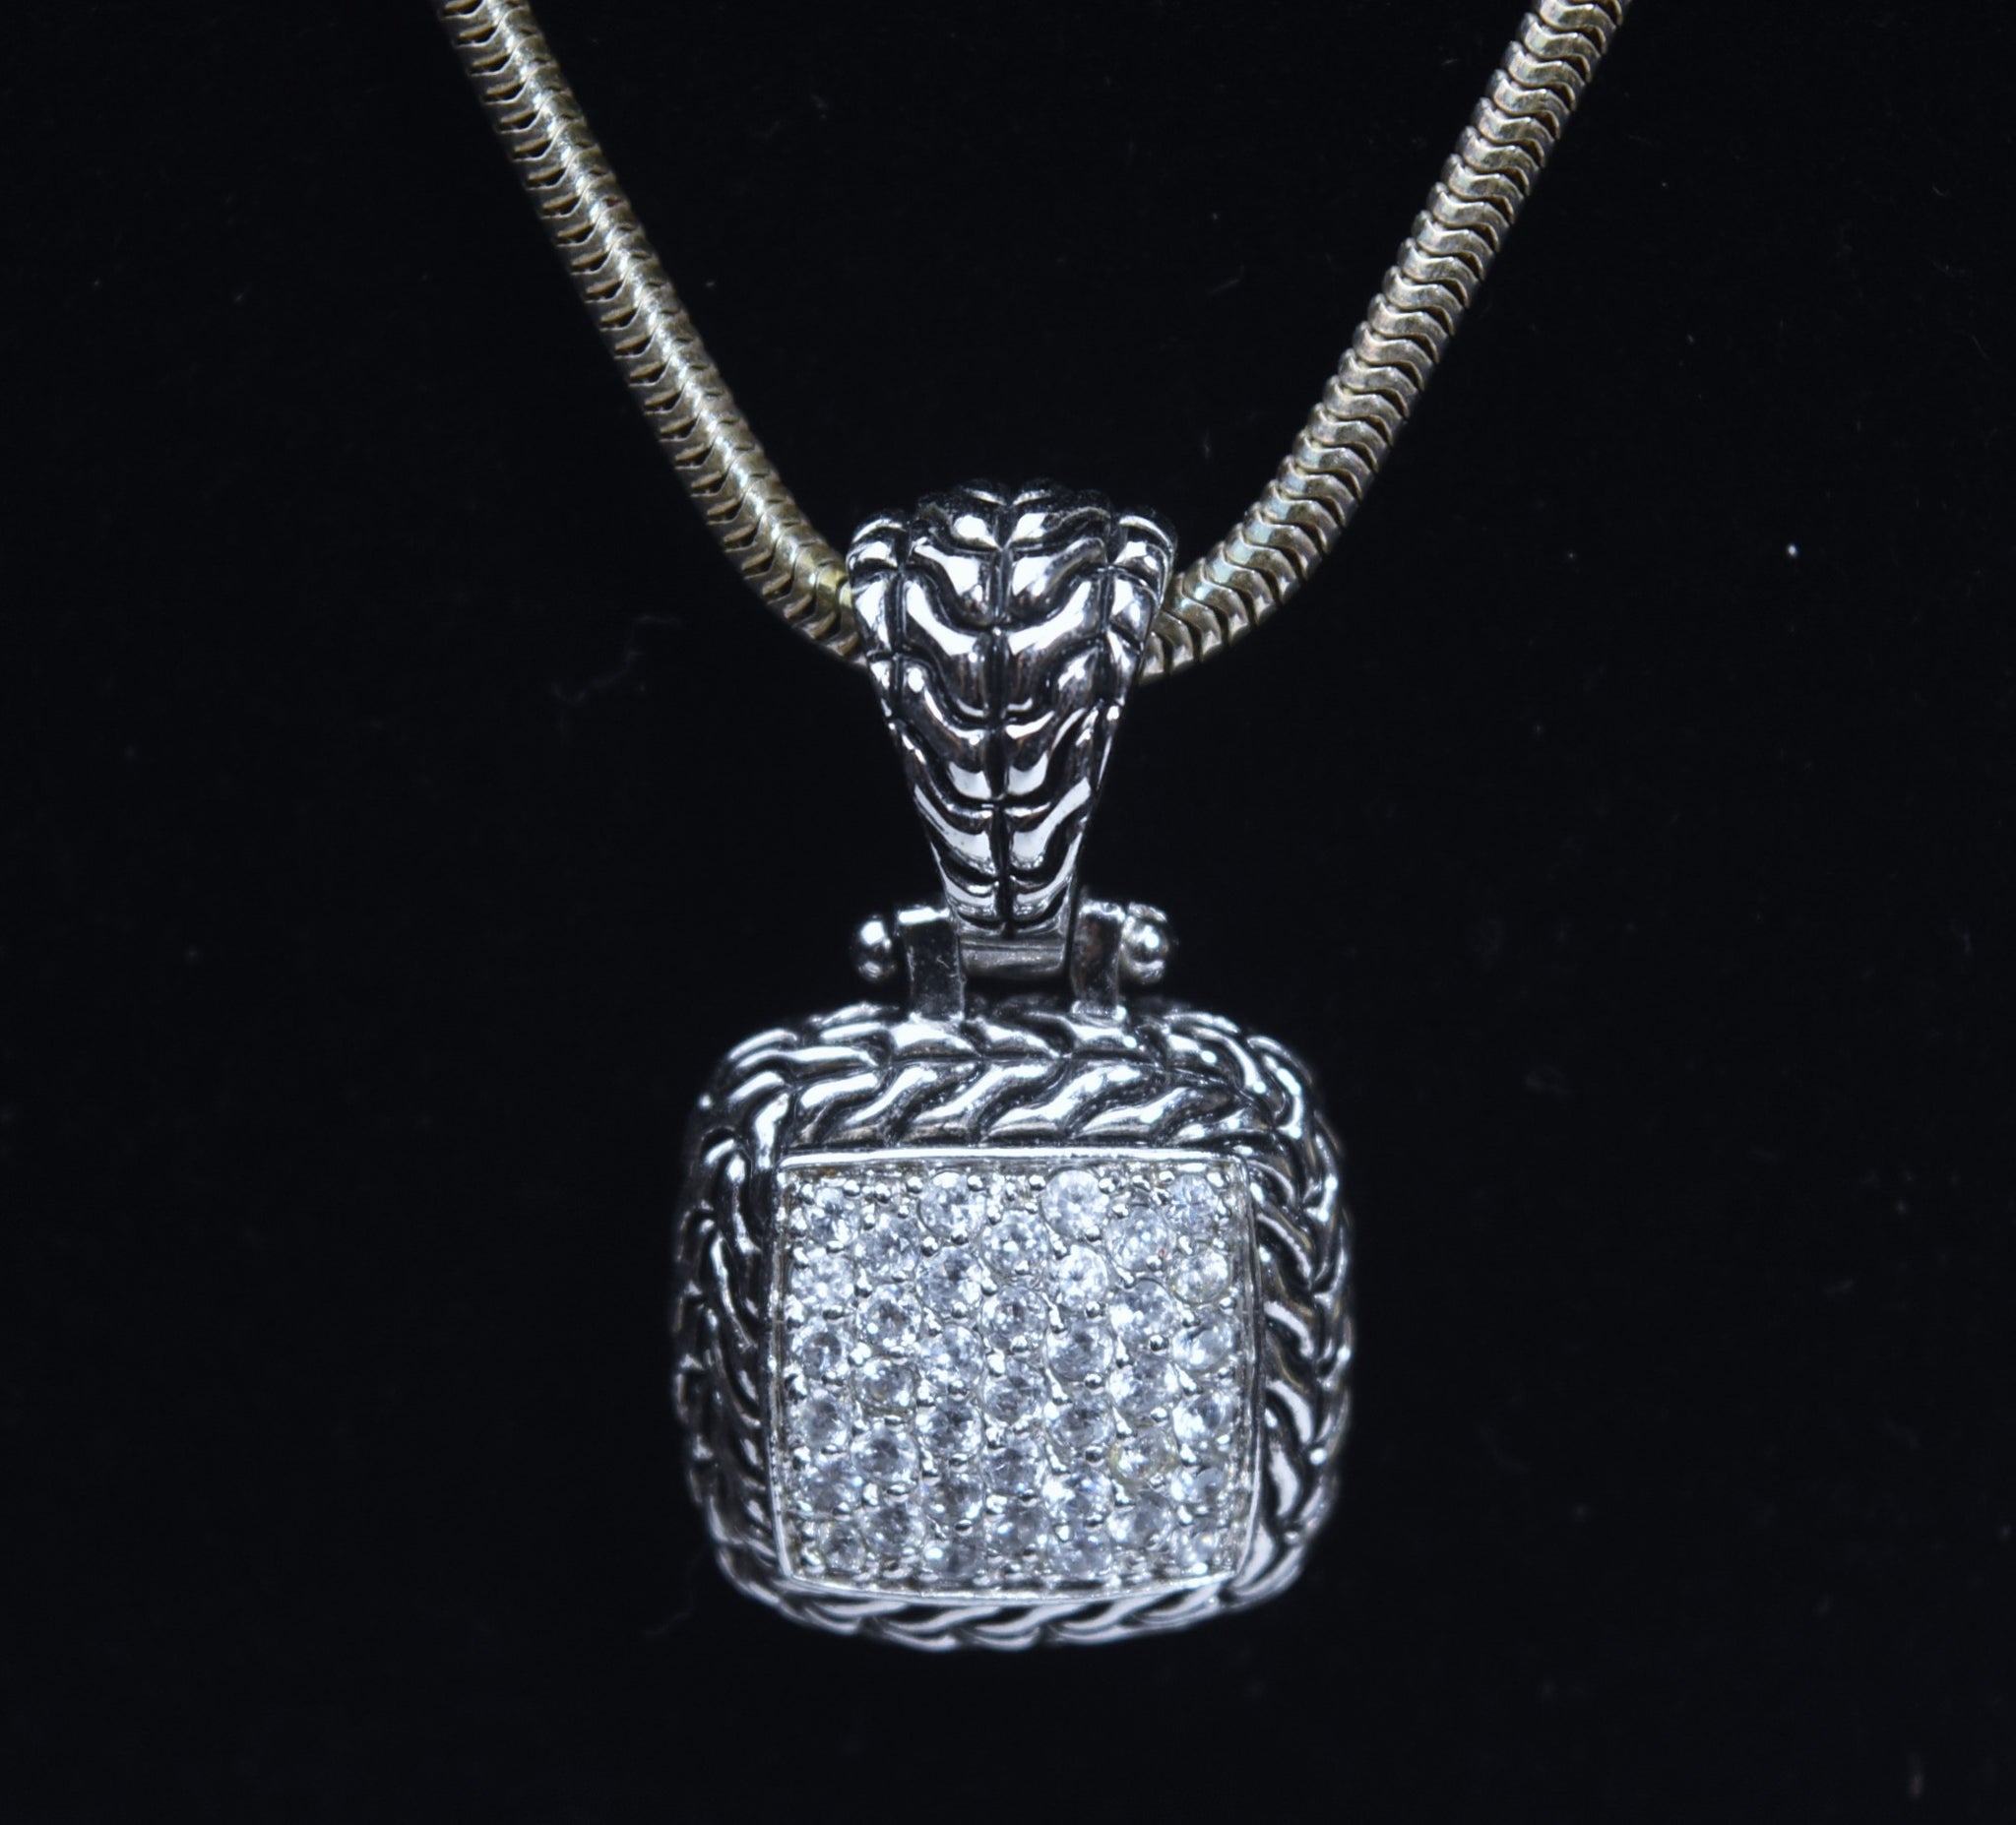 Sterling Silver Pave Set Crystal Pendant on Sterling Silver Serpentine Link Chain Necklace